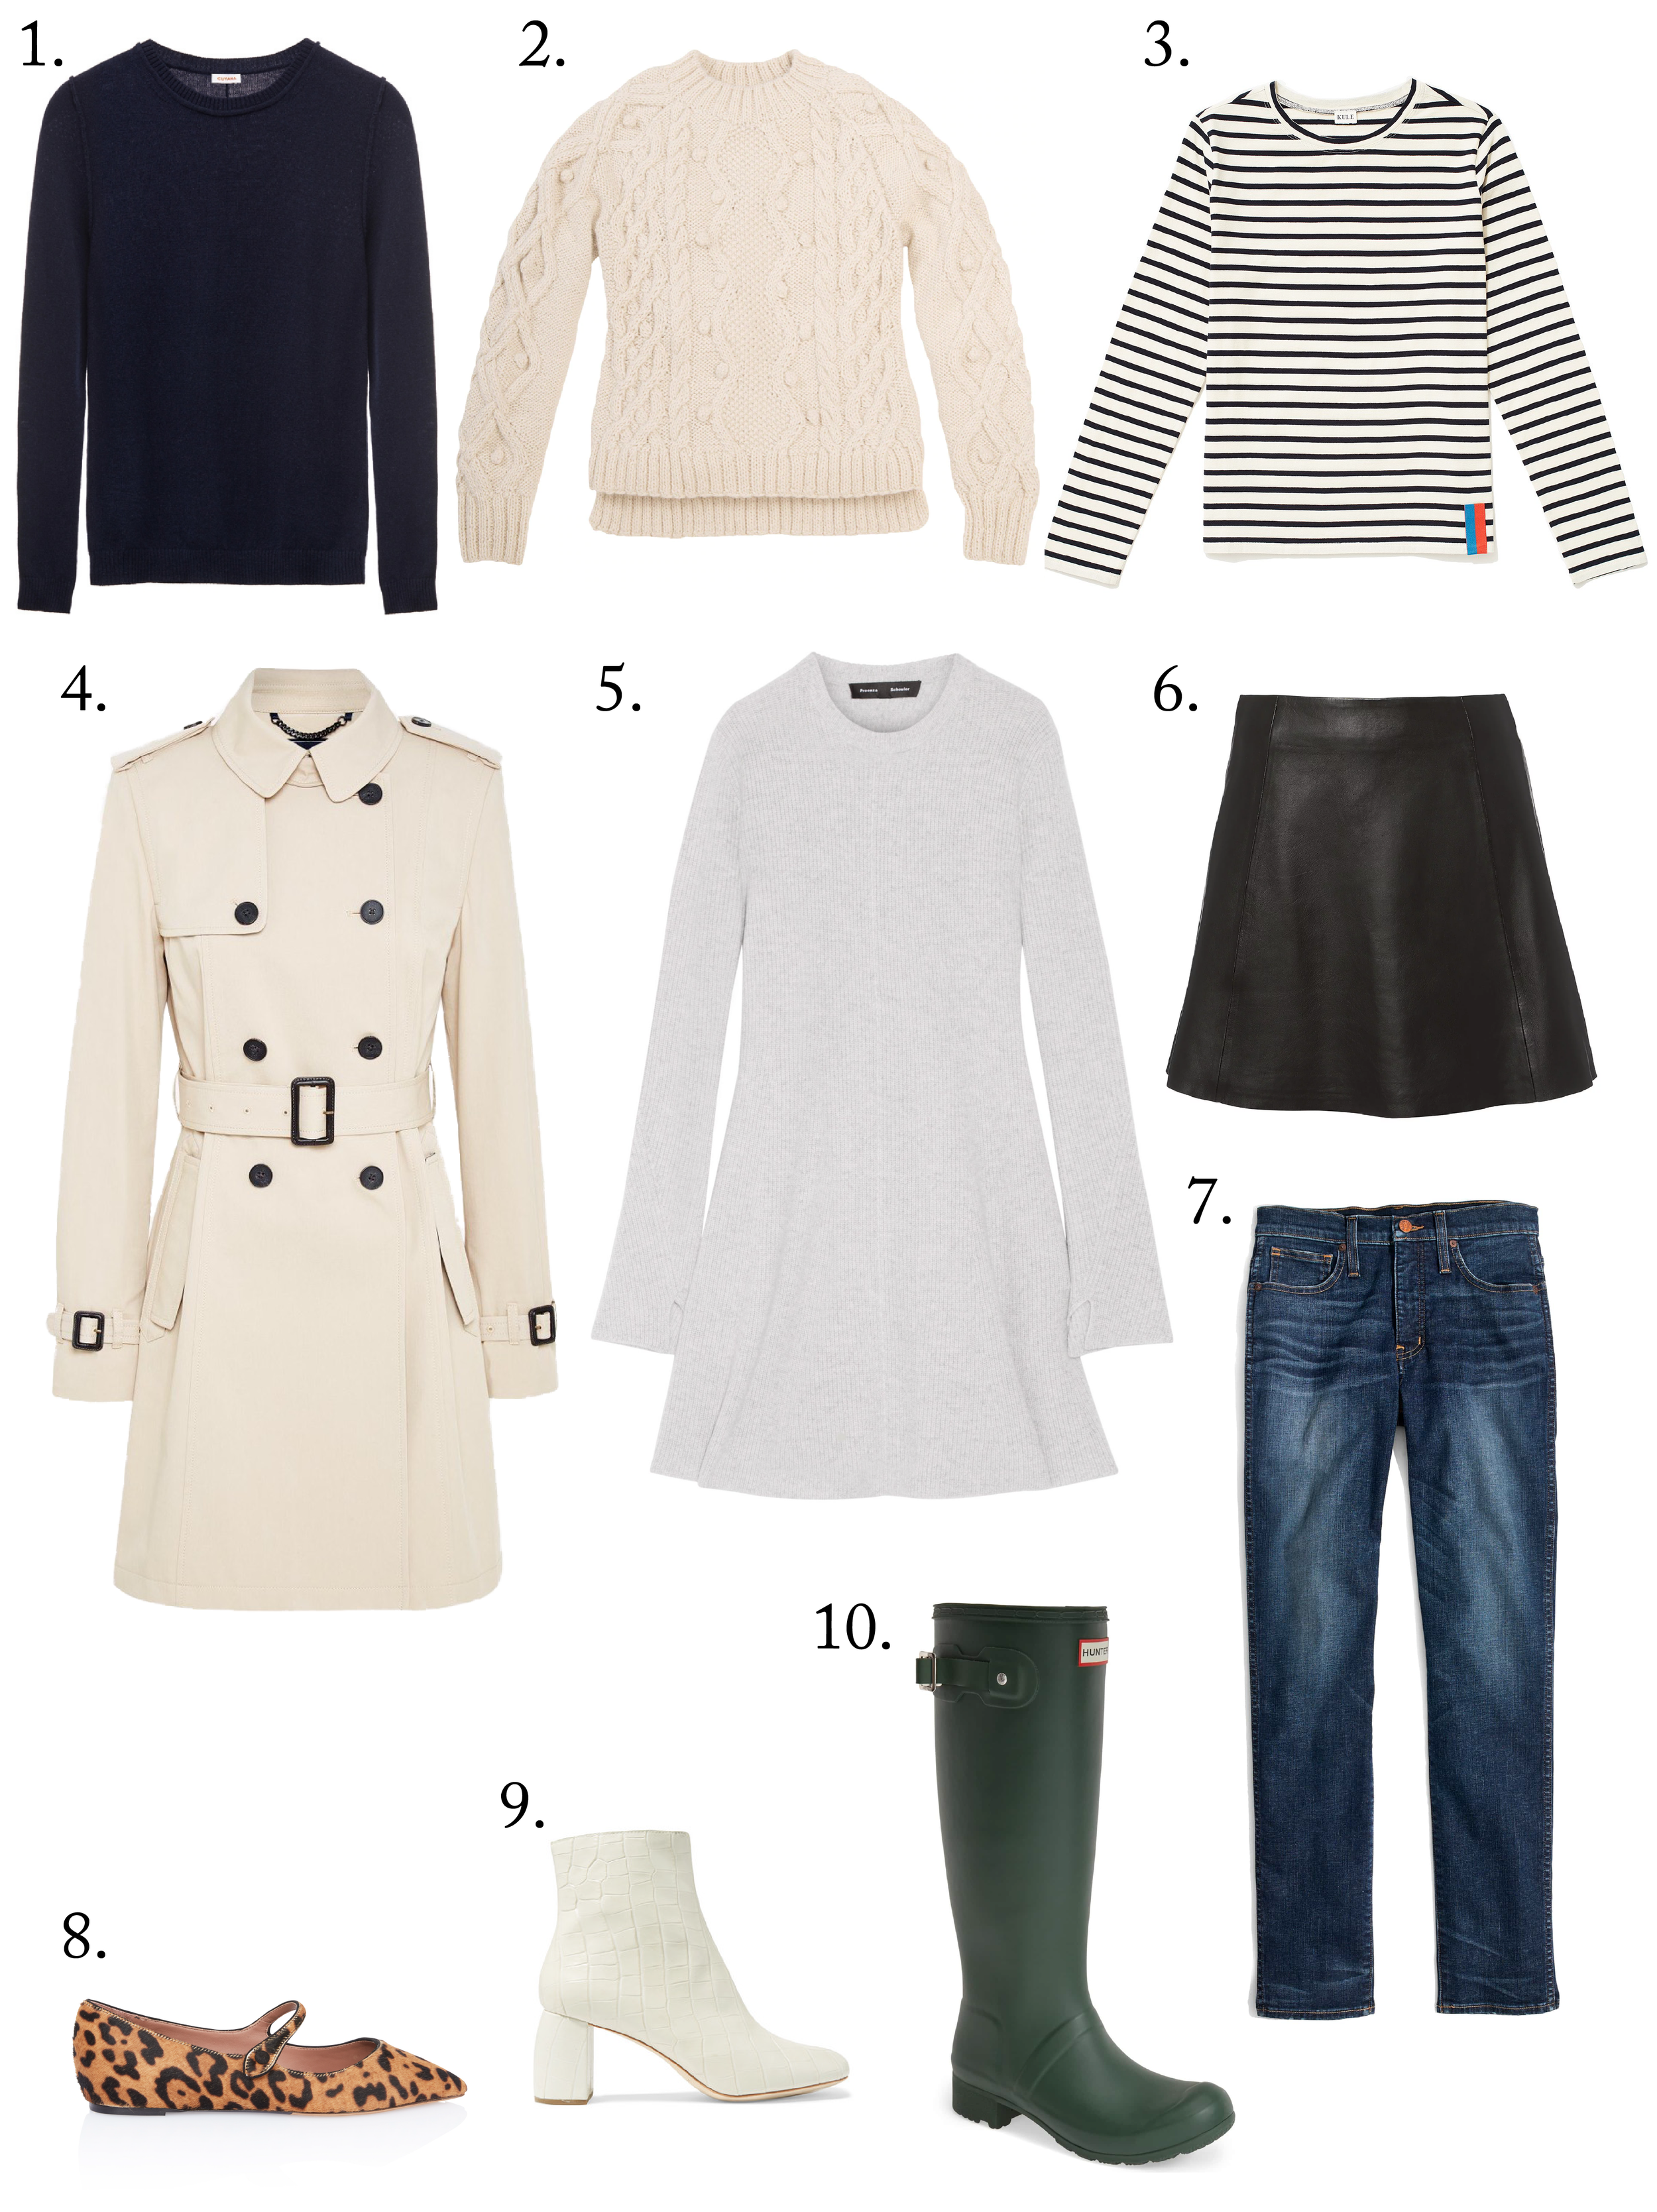 My Top 10 Style Staples for Fall | As a lover of fashion and classic style, these are the ten things I wear constantly in autumn. From leather jackets to stylish flats, click through to shop them all!